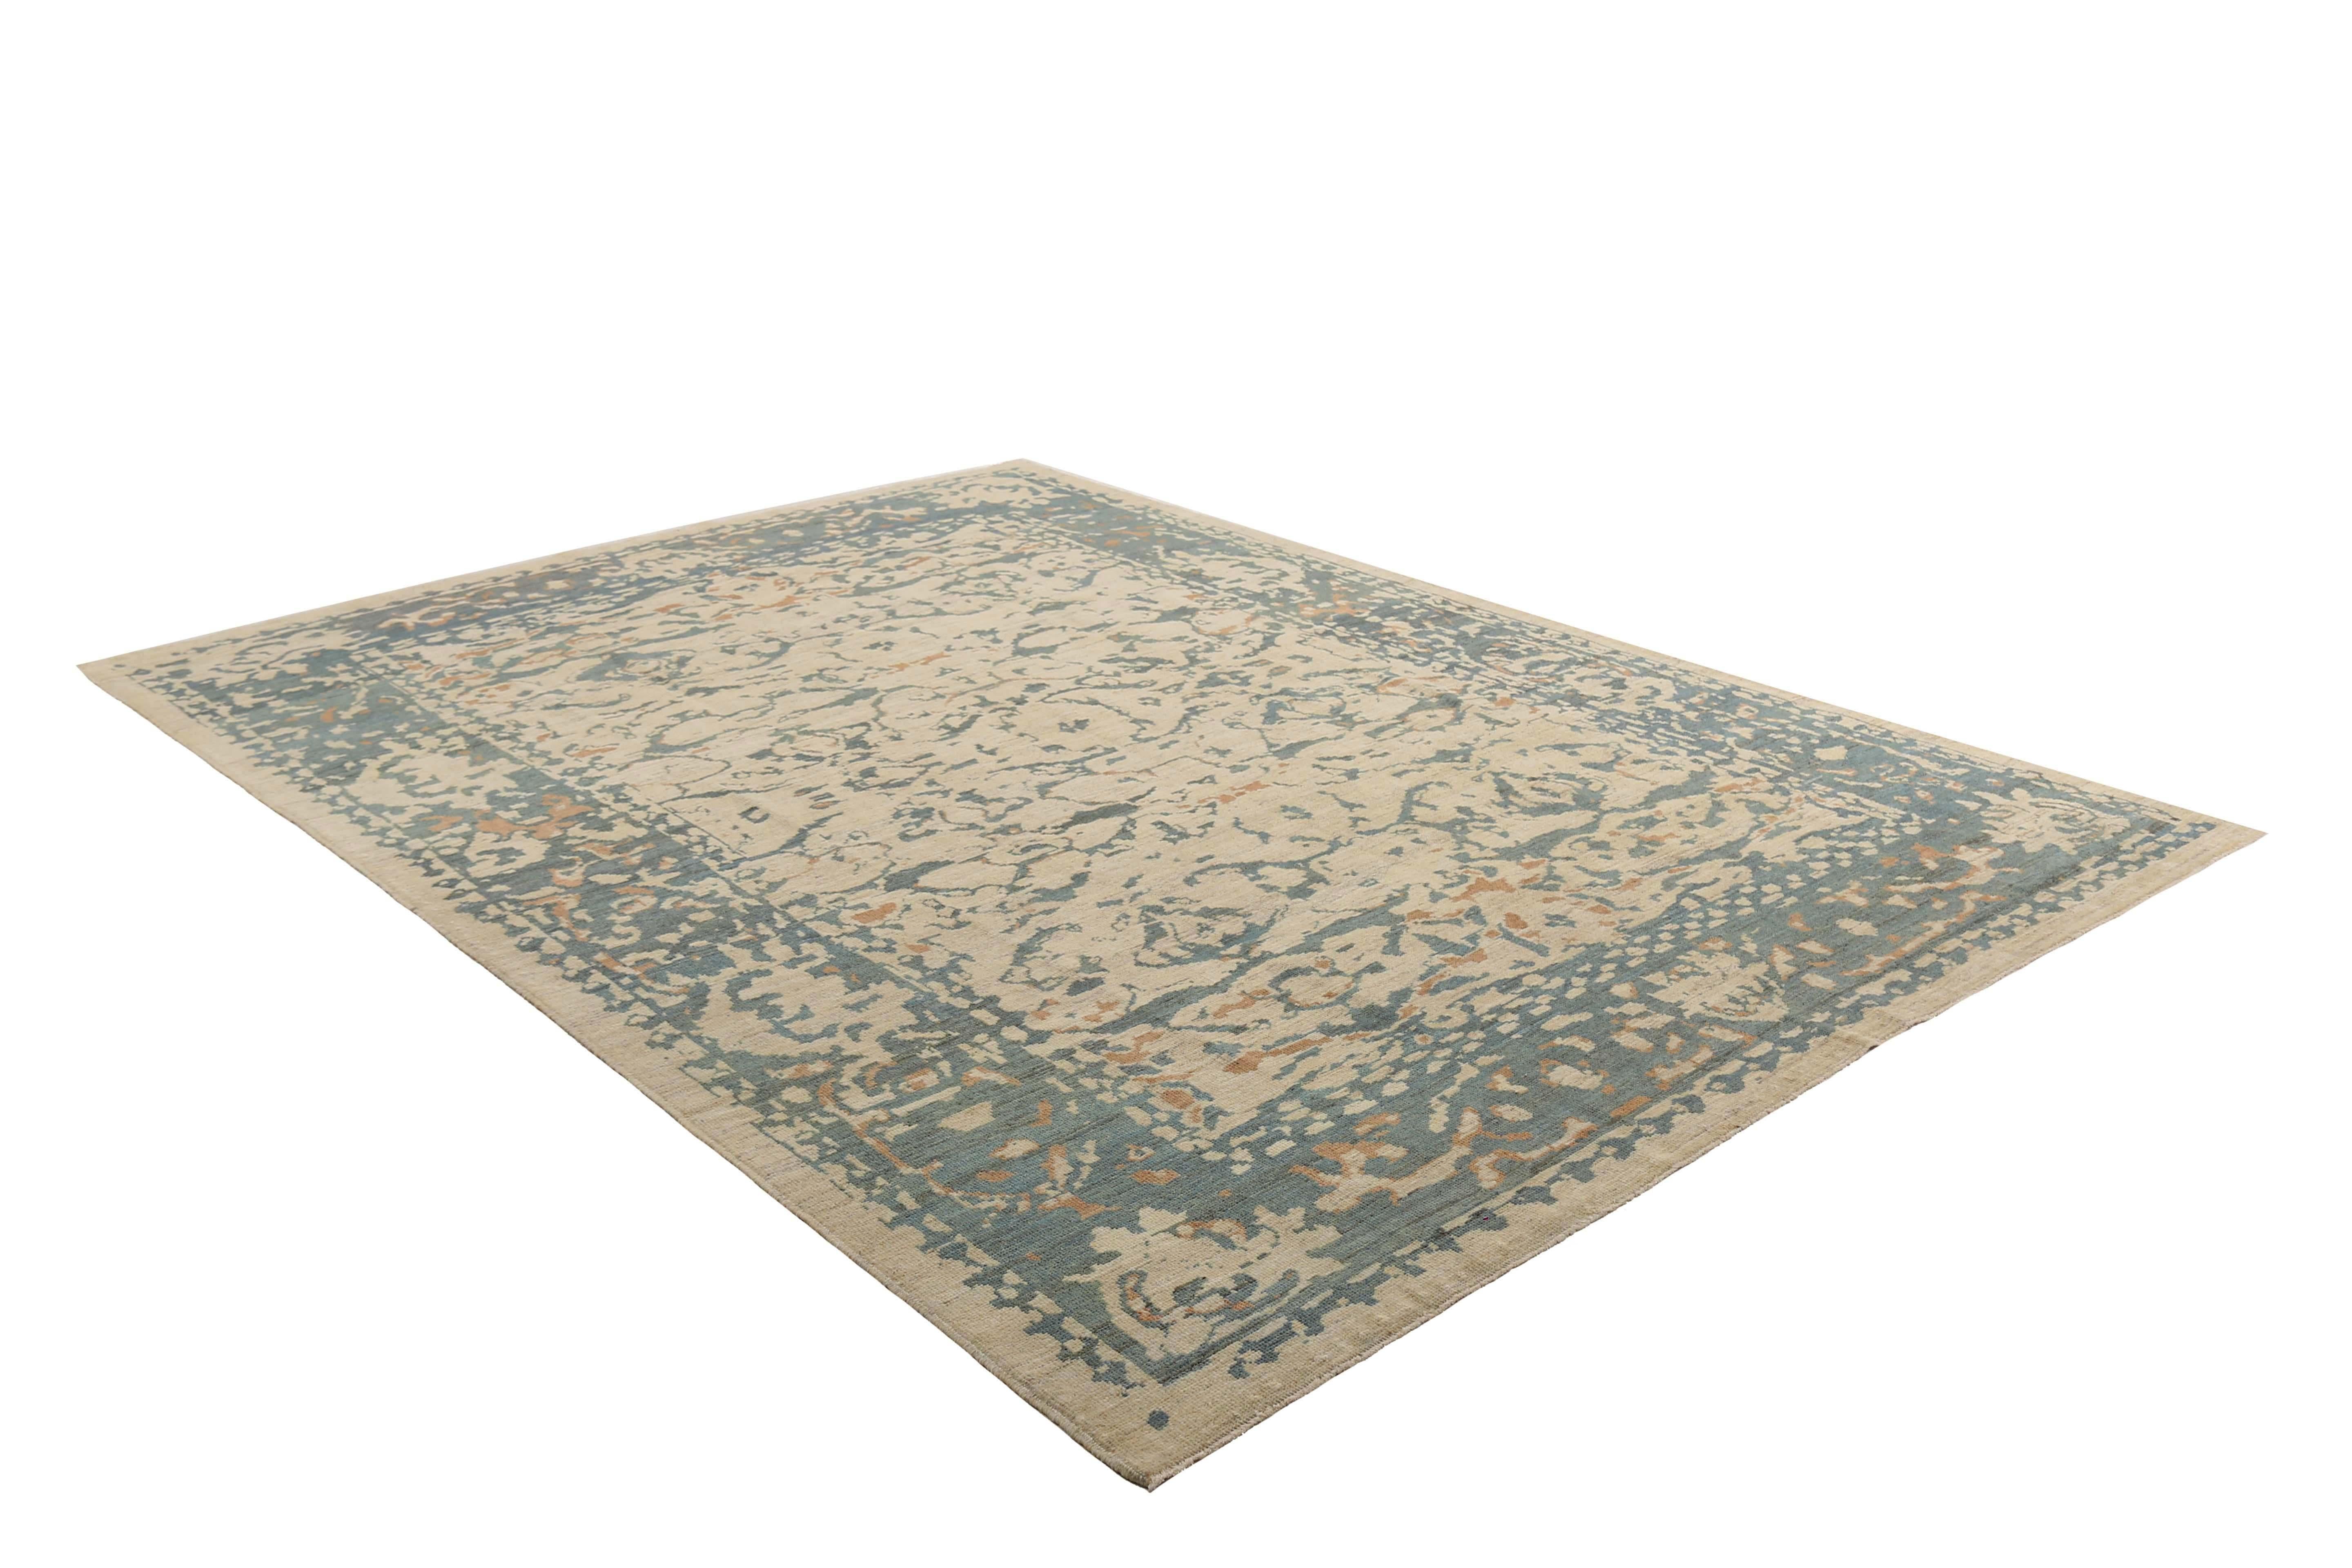 Add a touch of modern elegance to your home with this stunning handmade Turkish Sultanabad rug. Measuring 9'5'' by 12'6'', this rug features a beautiful beige background with a unique and eye-catching design composed of blue, green, and orange